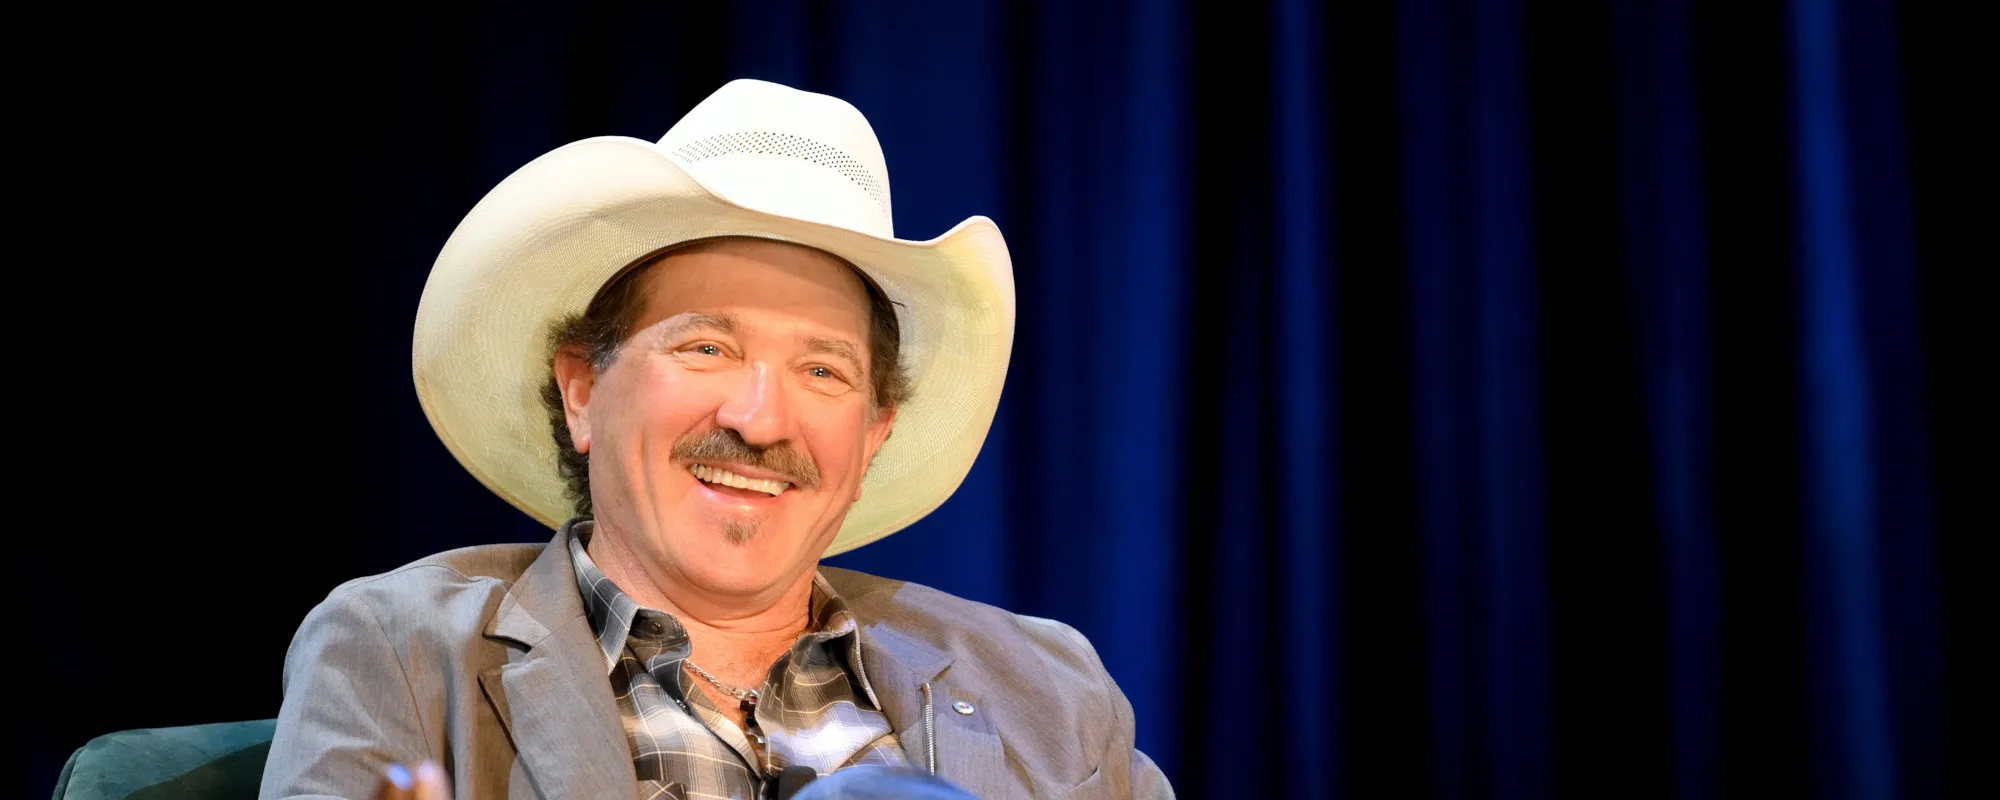 5 Songs You Didn’t Know Kix Brooks Wrote for Brooks & Dunn